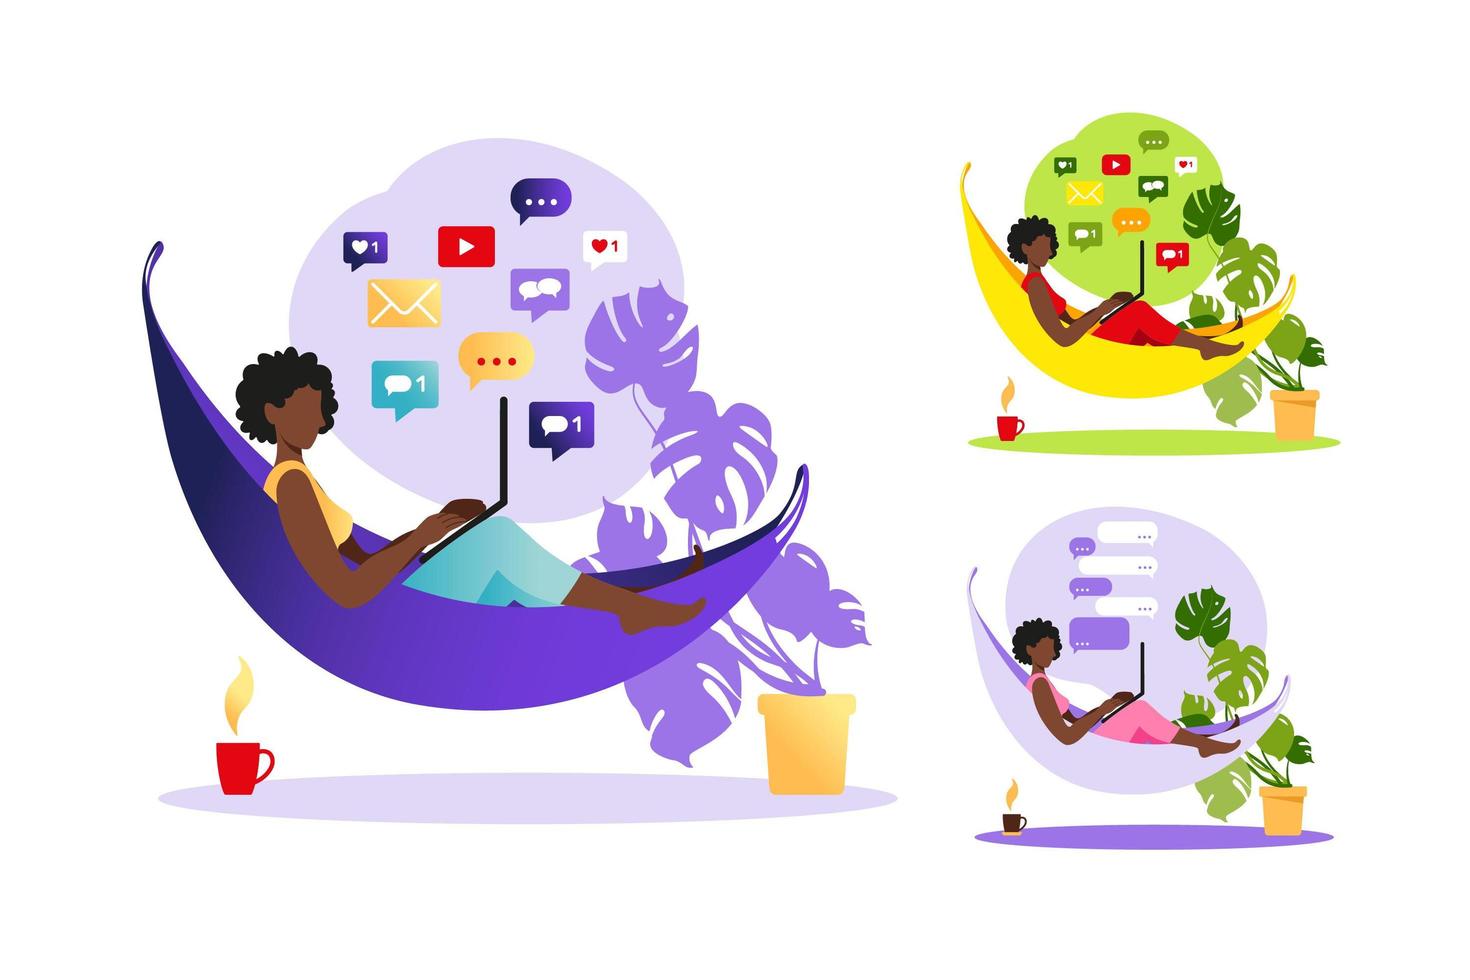 African woman sitting on hammock with laptop. Working on a computer. Freelance, online education or social media concept. Working from home, remote job. Flat style modern vector illustration.